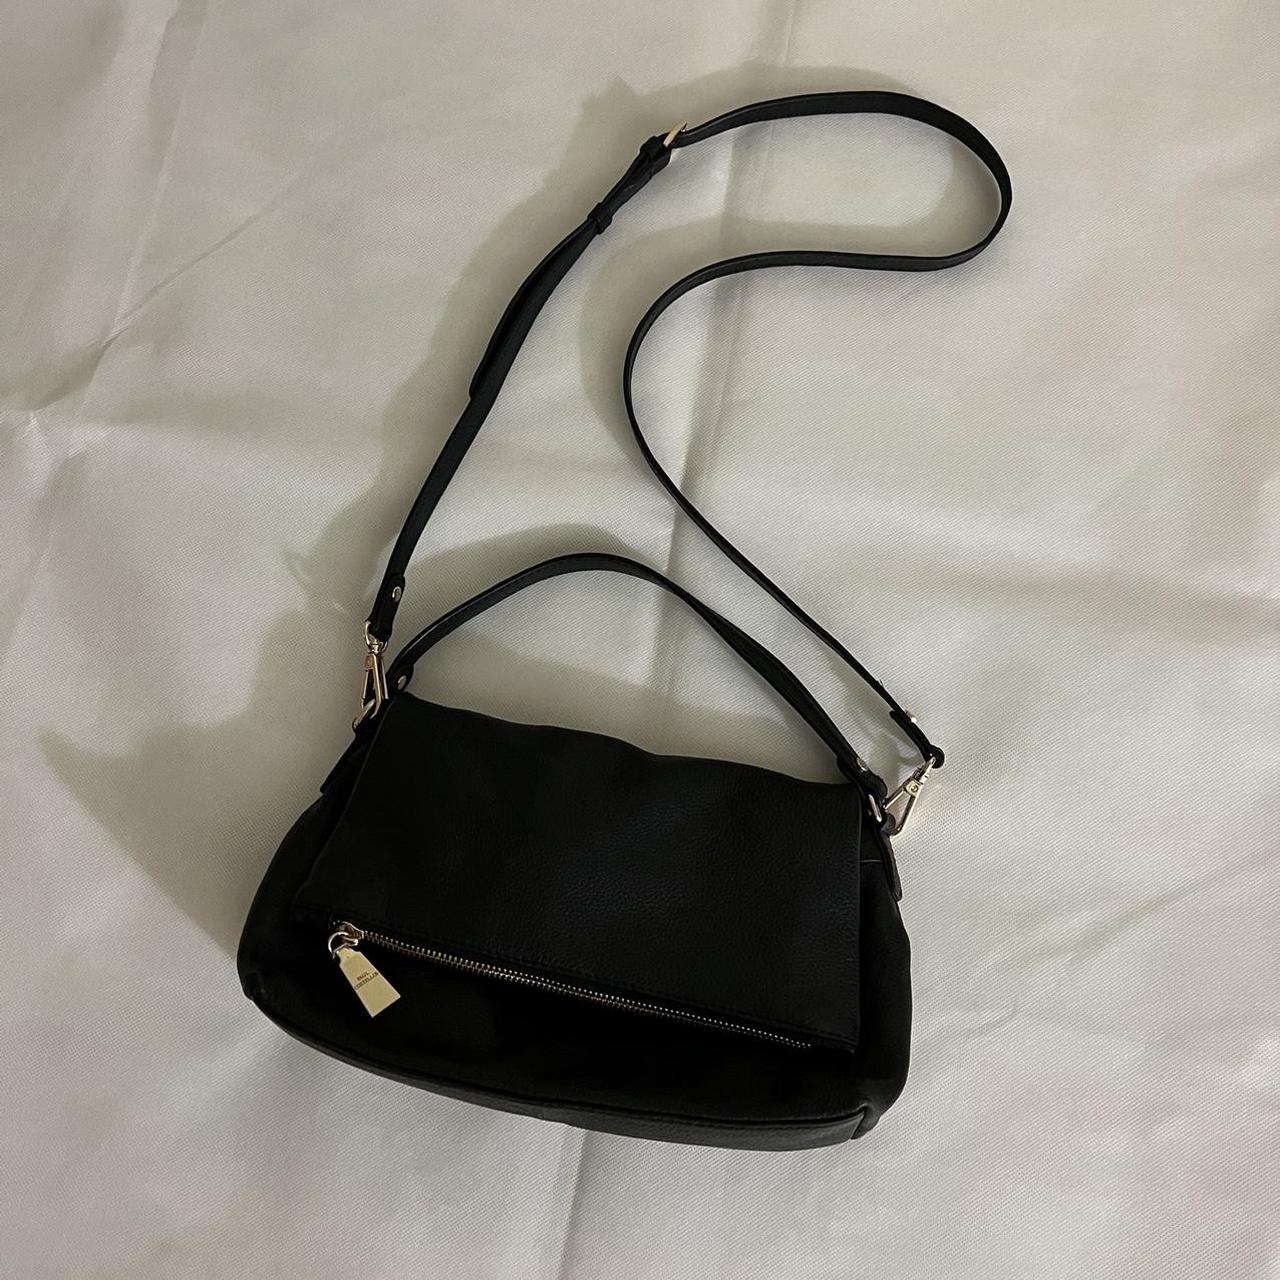 Product Image 1 - Leather Crossbody Bag
The strap is